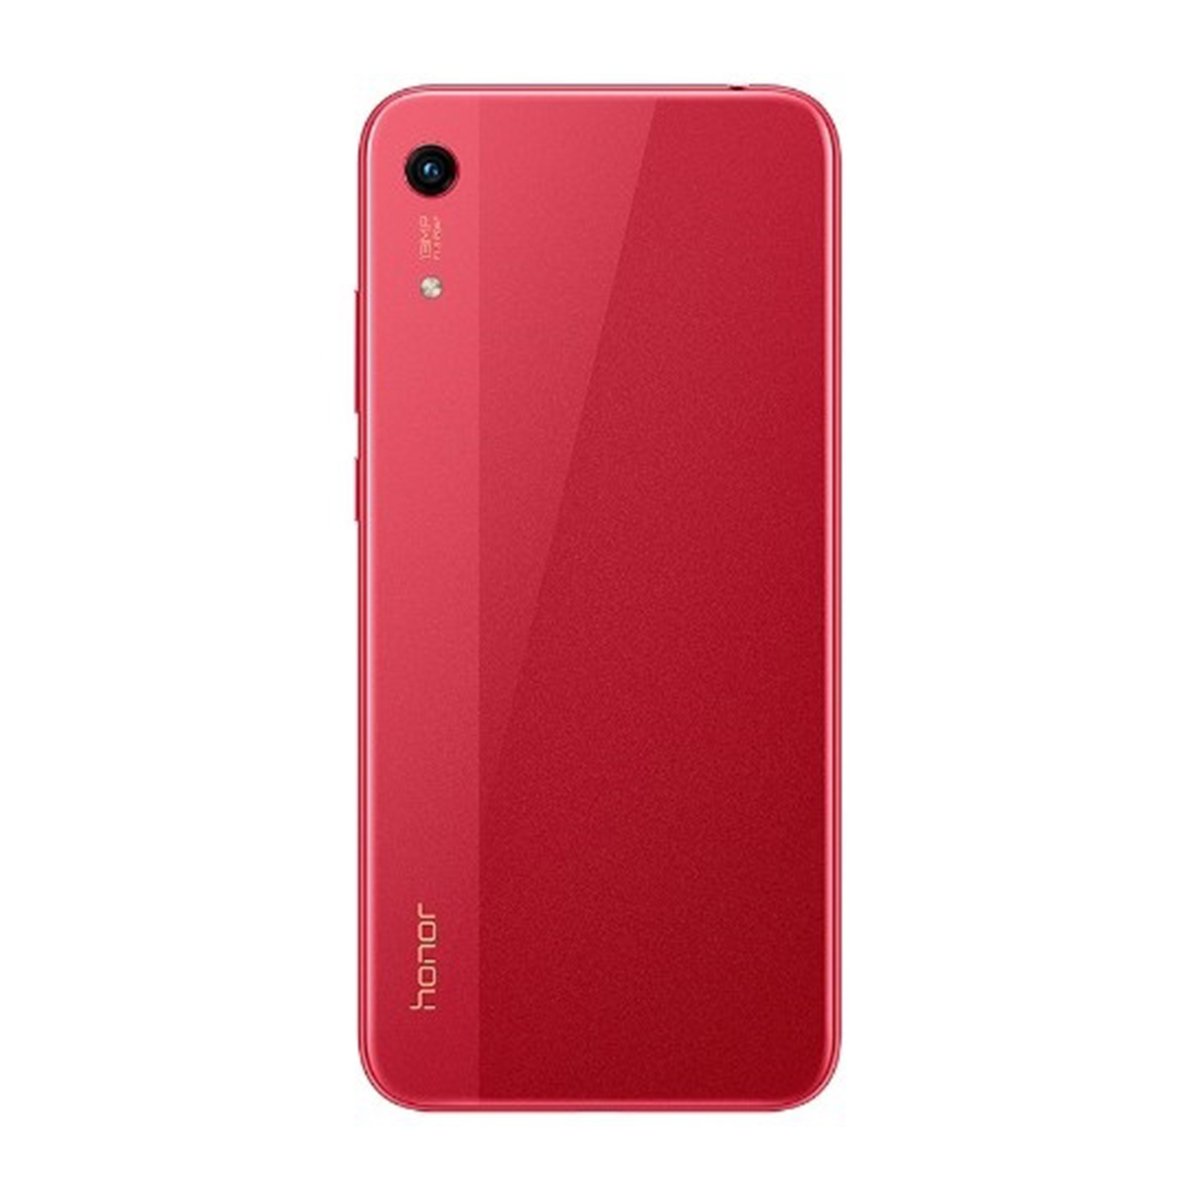 Honor 8A 32GB Red